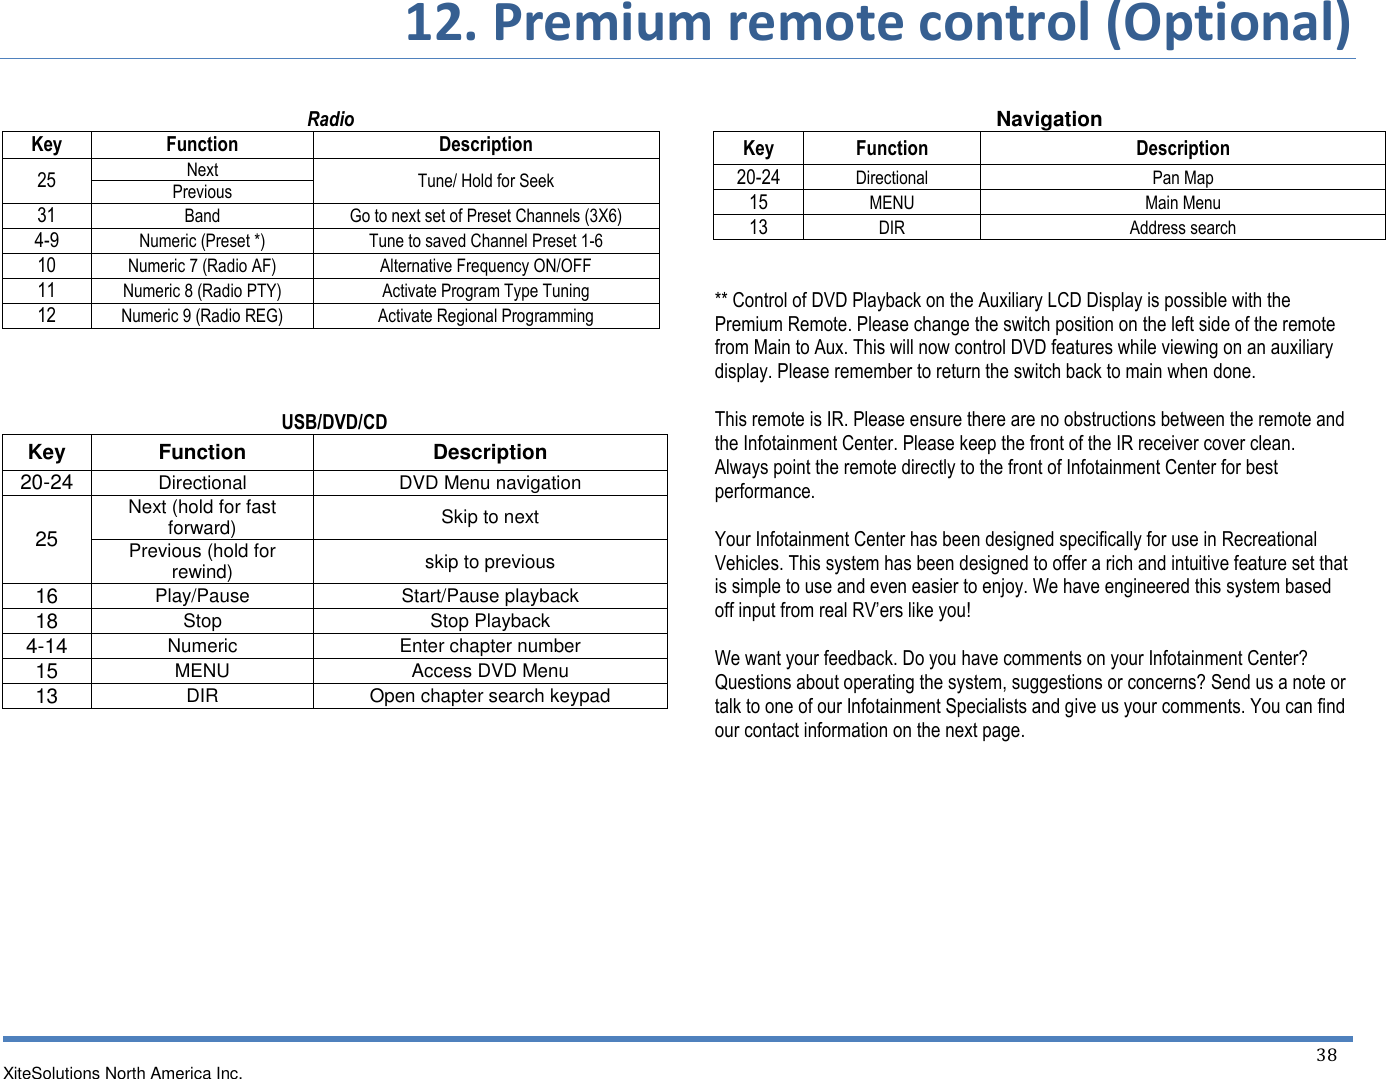       12. Premium remote control (Optional)   XiteSolutions North America Inc.  38   Radio Key Function Description 25 Next Tune/ Hold for Seek Previous 31 Band Go to next set of Preset Channels (3X6) 4-9 Numeric (Preset *) Tune to saved Channel Preset 1-6 10 Numeric 7 (Radio AF) Alternative Frequency ON/OFF 11 Numeric 8 (Radio PTY) Activate Program Type Tuning 12 Numeric 9 (Radio REG) Activate Regional Programming    USB/DVD/CD Key Function Description 20-24 Directional DVD Menu navigation 25 Next (hold for fast forward) Skip to next Previous (hold for rewind) skip to previous 16 Play/Pause Start/Pause playback 18 Stop Stop Playback 4-14 Numeric Enter chapter number 15 MENU Access DVD Menu 13 DIR Open chapter search keypad                Navigation Key Function Description 20-24 Directional Pan Map 15 MENU Main Menu 13 DIR Address search   ** Control of DVD Playback on the Auxiliary LCD Display is possible with the Premium Remote. Please change the switch position on the left side of the remote from Main to Aux. This will now control DVD features while viewing on an auxiliary display. Please remember to return the switch back to main when done.  This remote is IR. Please ensure there are no obstructions between the remote and the Infotainment Center. Please keep the front of the IR receiver cover clean. Always point the remote directly to the front of Infotainment Center for best performance.  Your Infotainment Center has been designed specifically for use in Recreational Vehicles. This system has been designed to offer a rich and intuitive feature set that is simple to use and even easier to enjoy. We have engineered this system based off input from real RV’ers like you!  We want your feedback. Do you have comments on your Infotainment Center? Questions about operating the system, suggestions or concerns? Send us a note or talk to one of our Infotainment Specialists and give us your comments. You can find our contact information on the next page.          